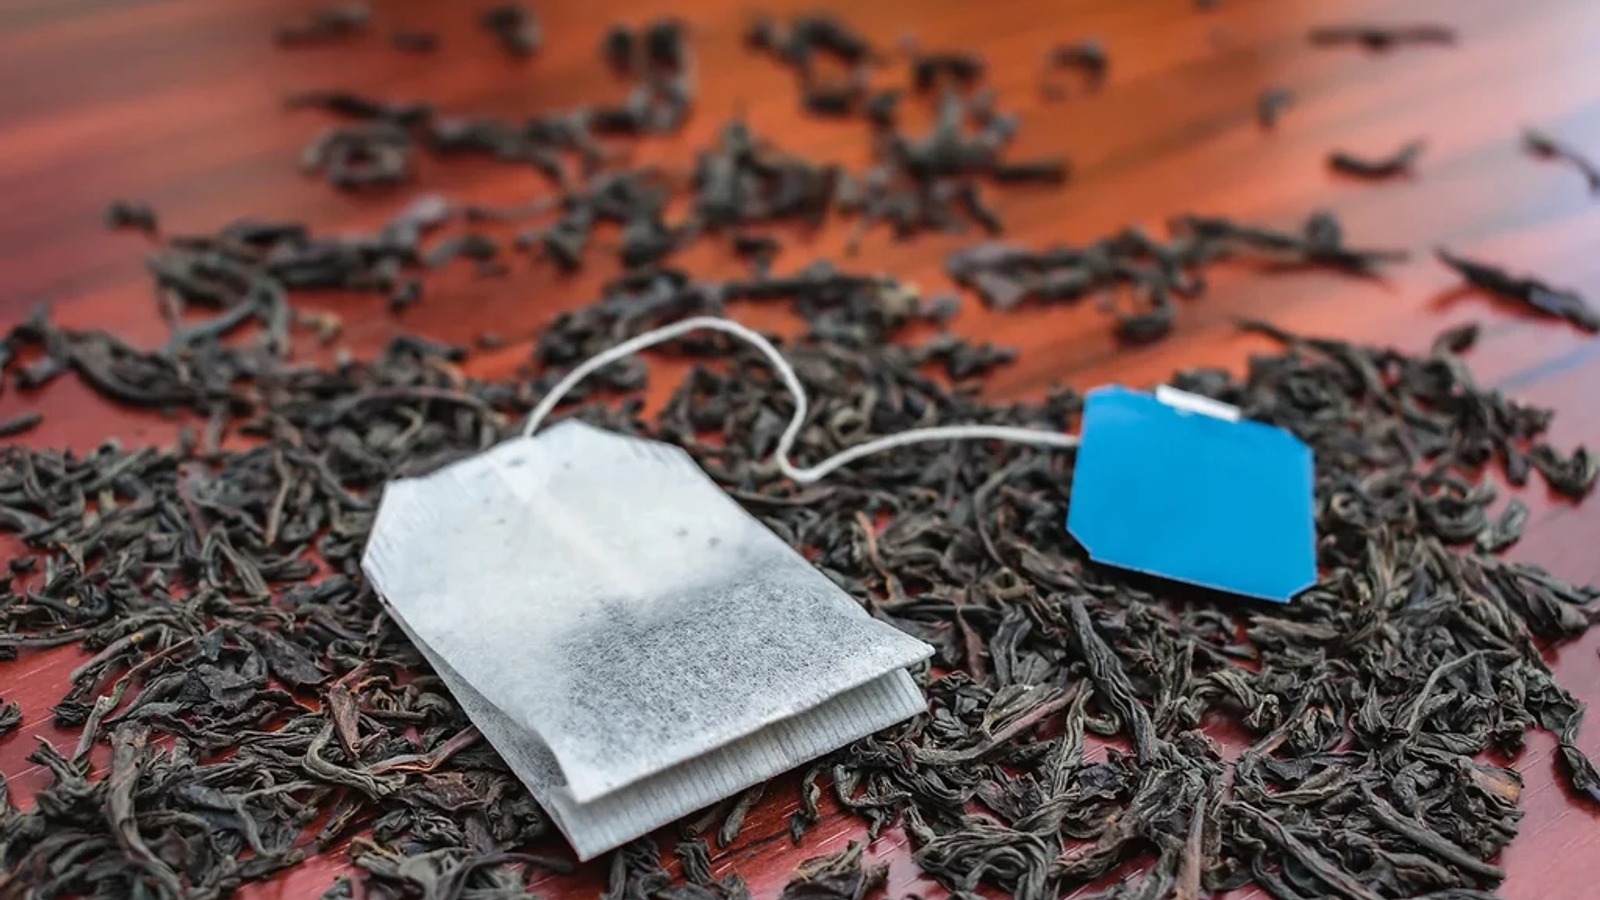 Teabag on some leaves on a table